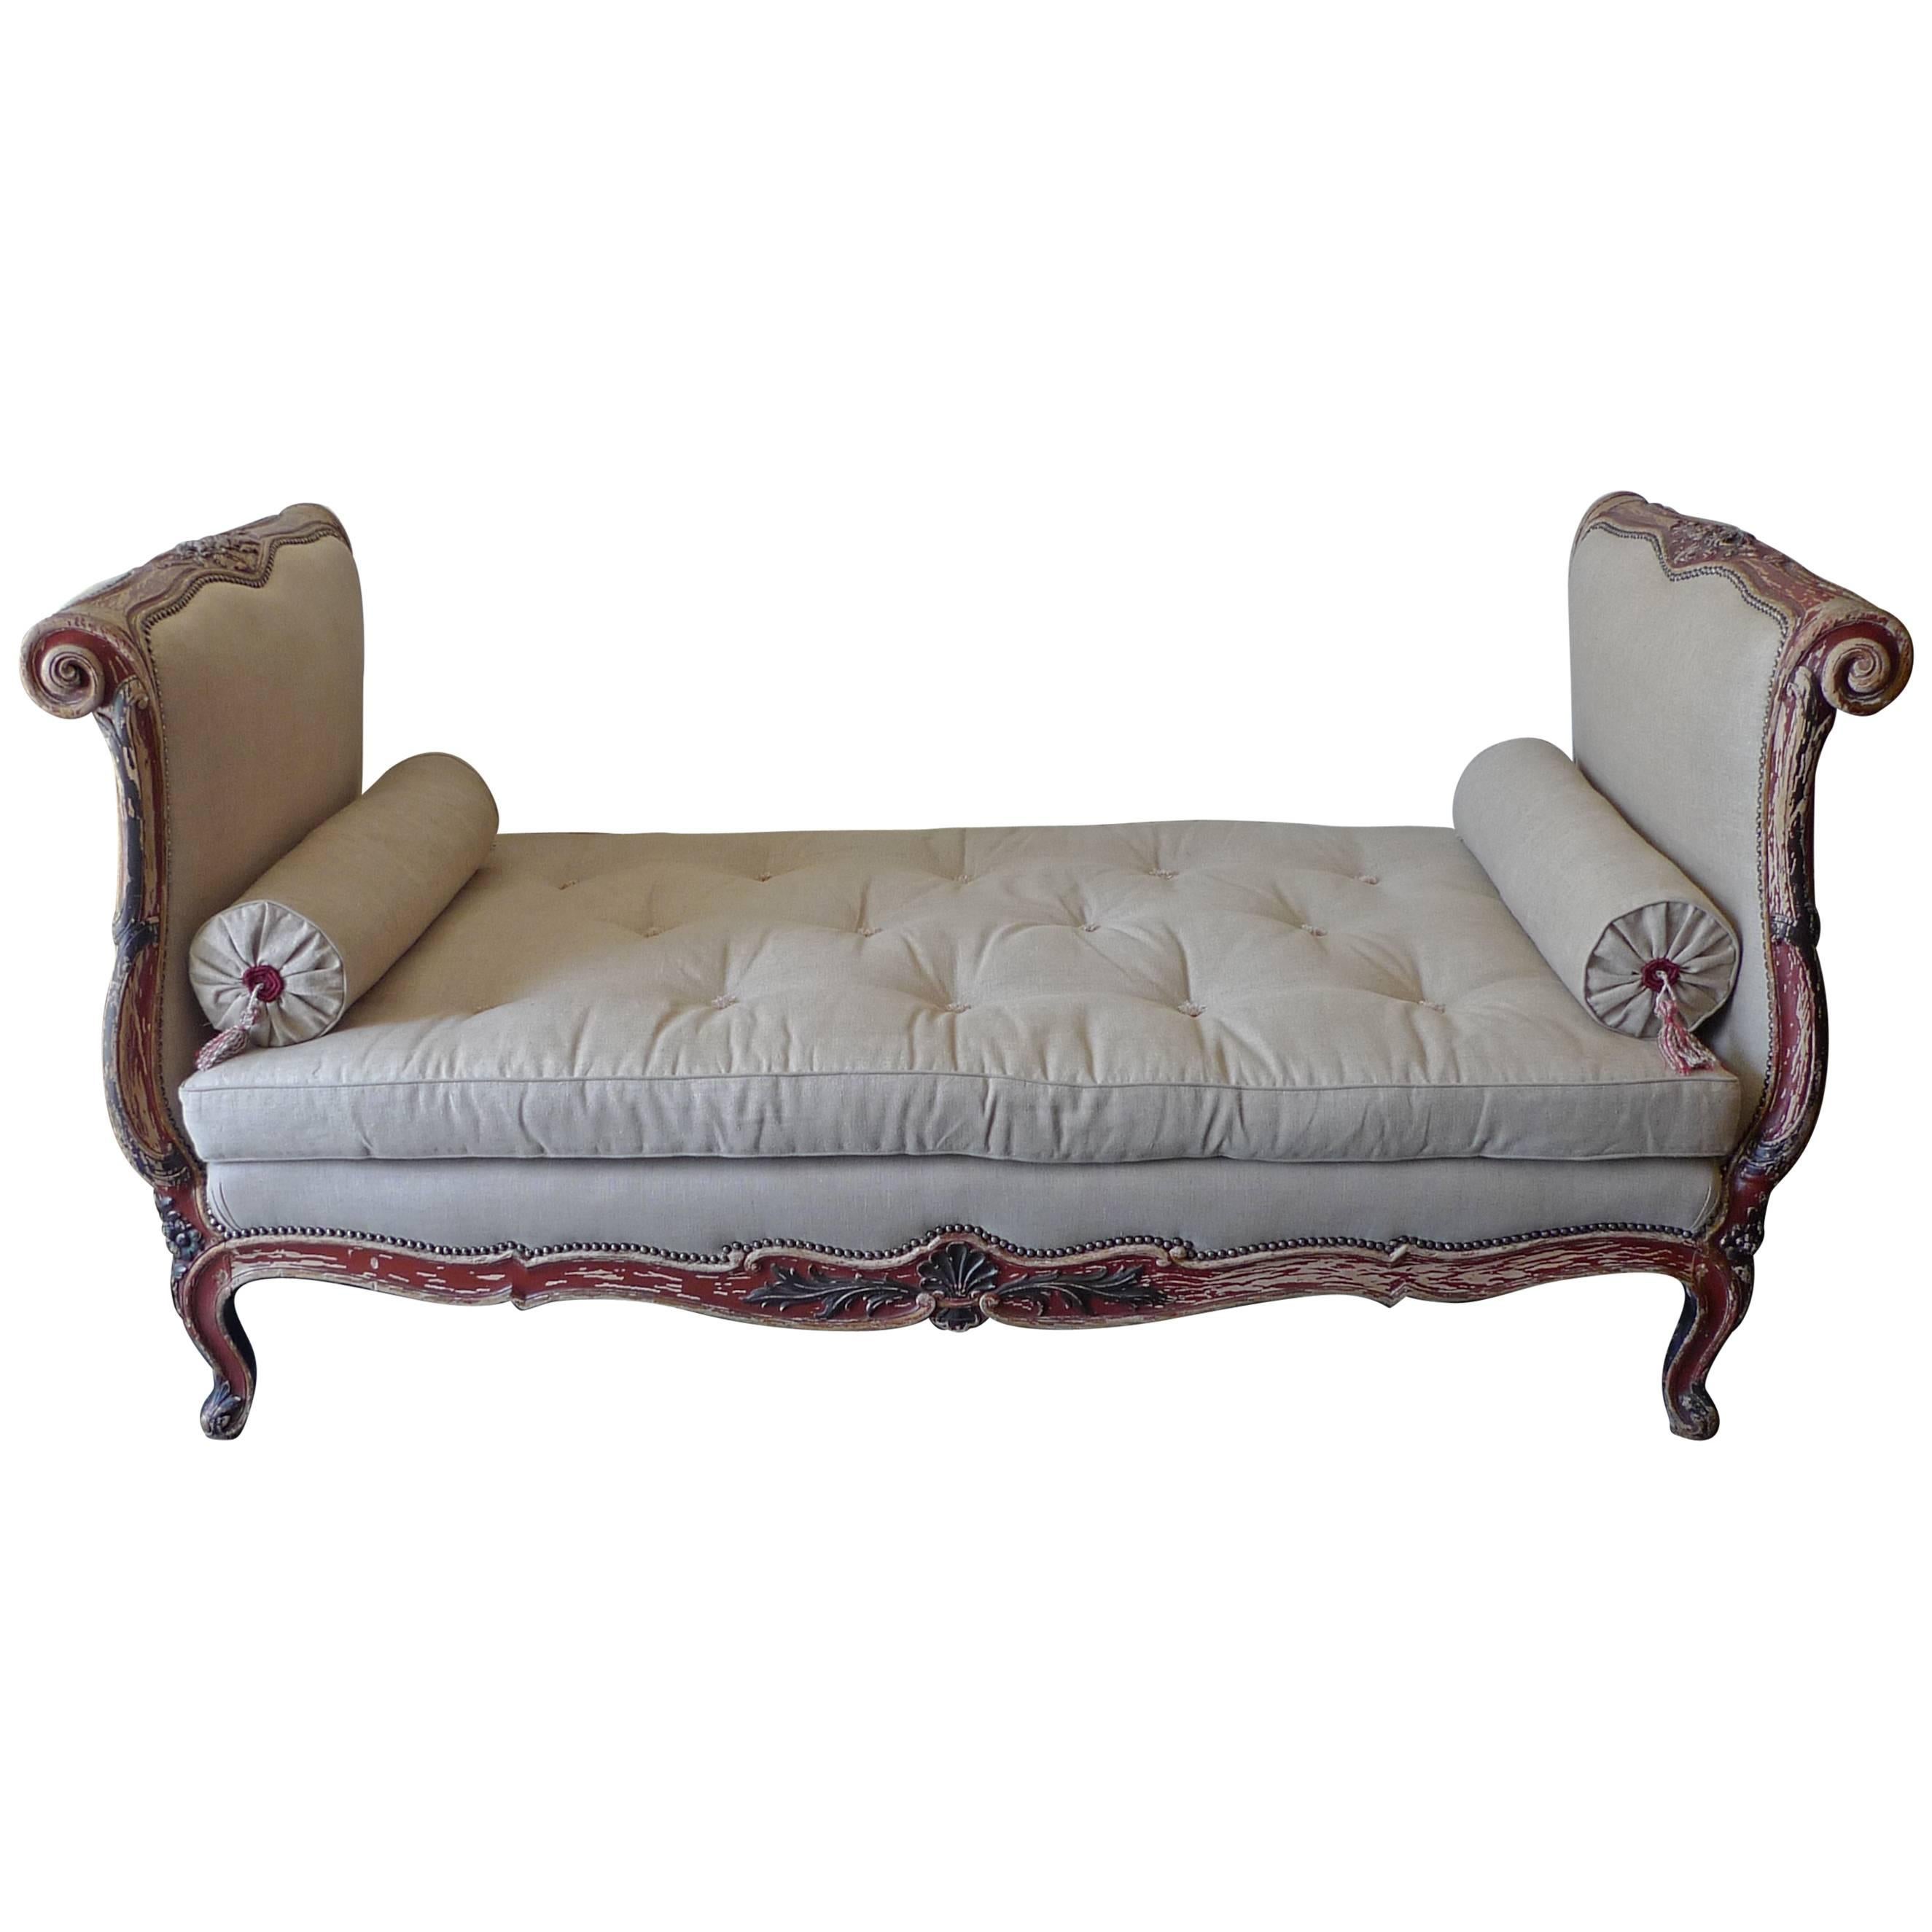 French XIX hand-carved painted chaize / daybed.